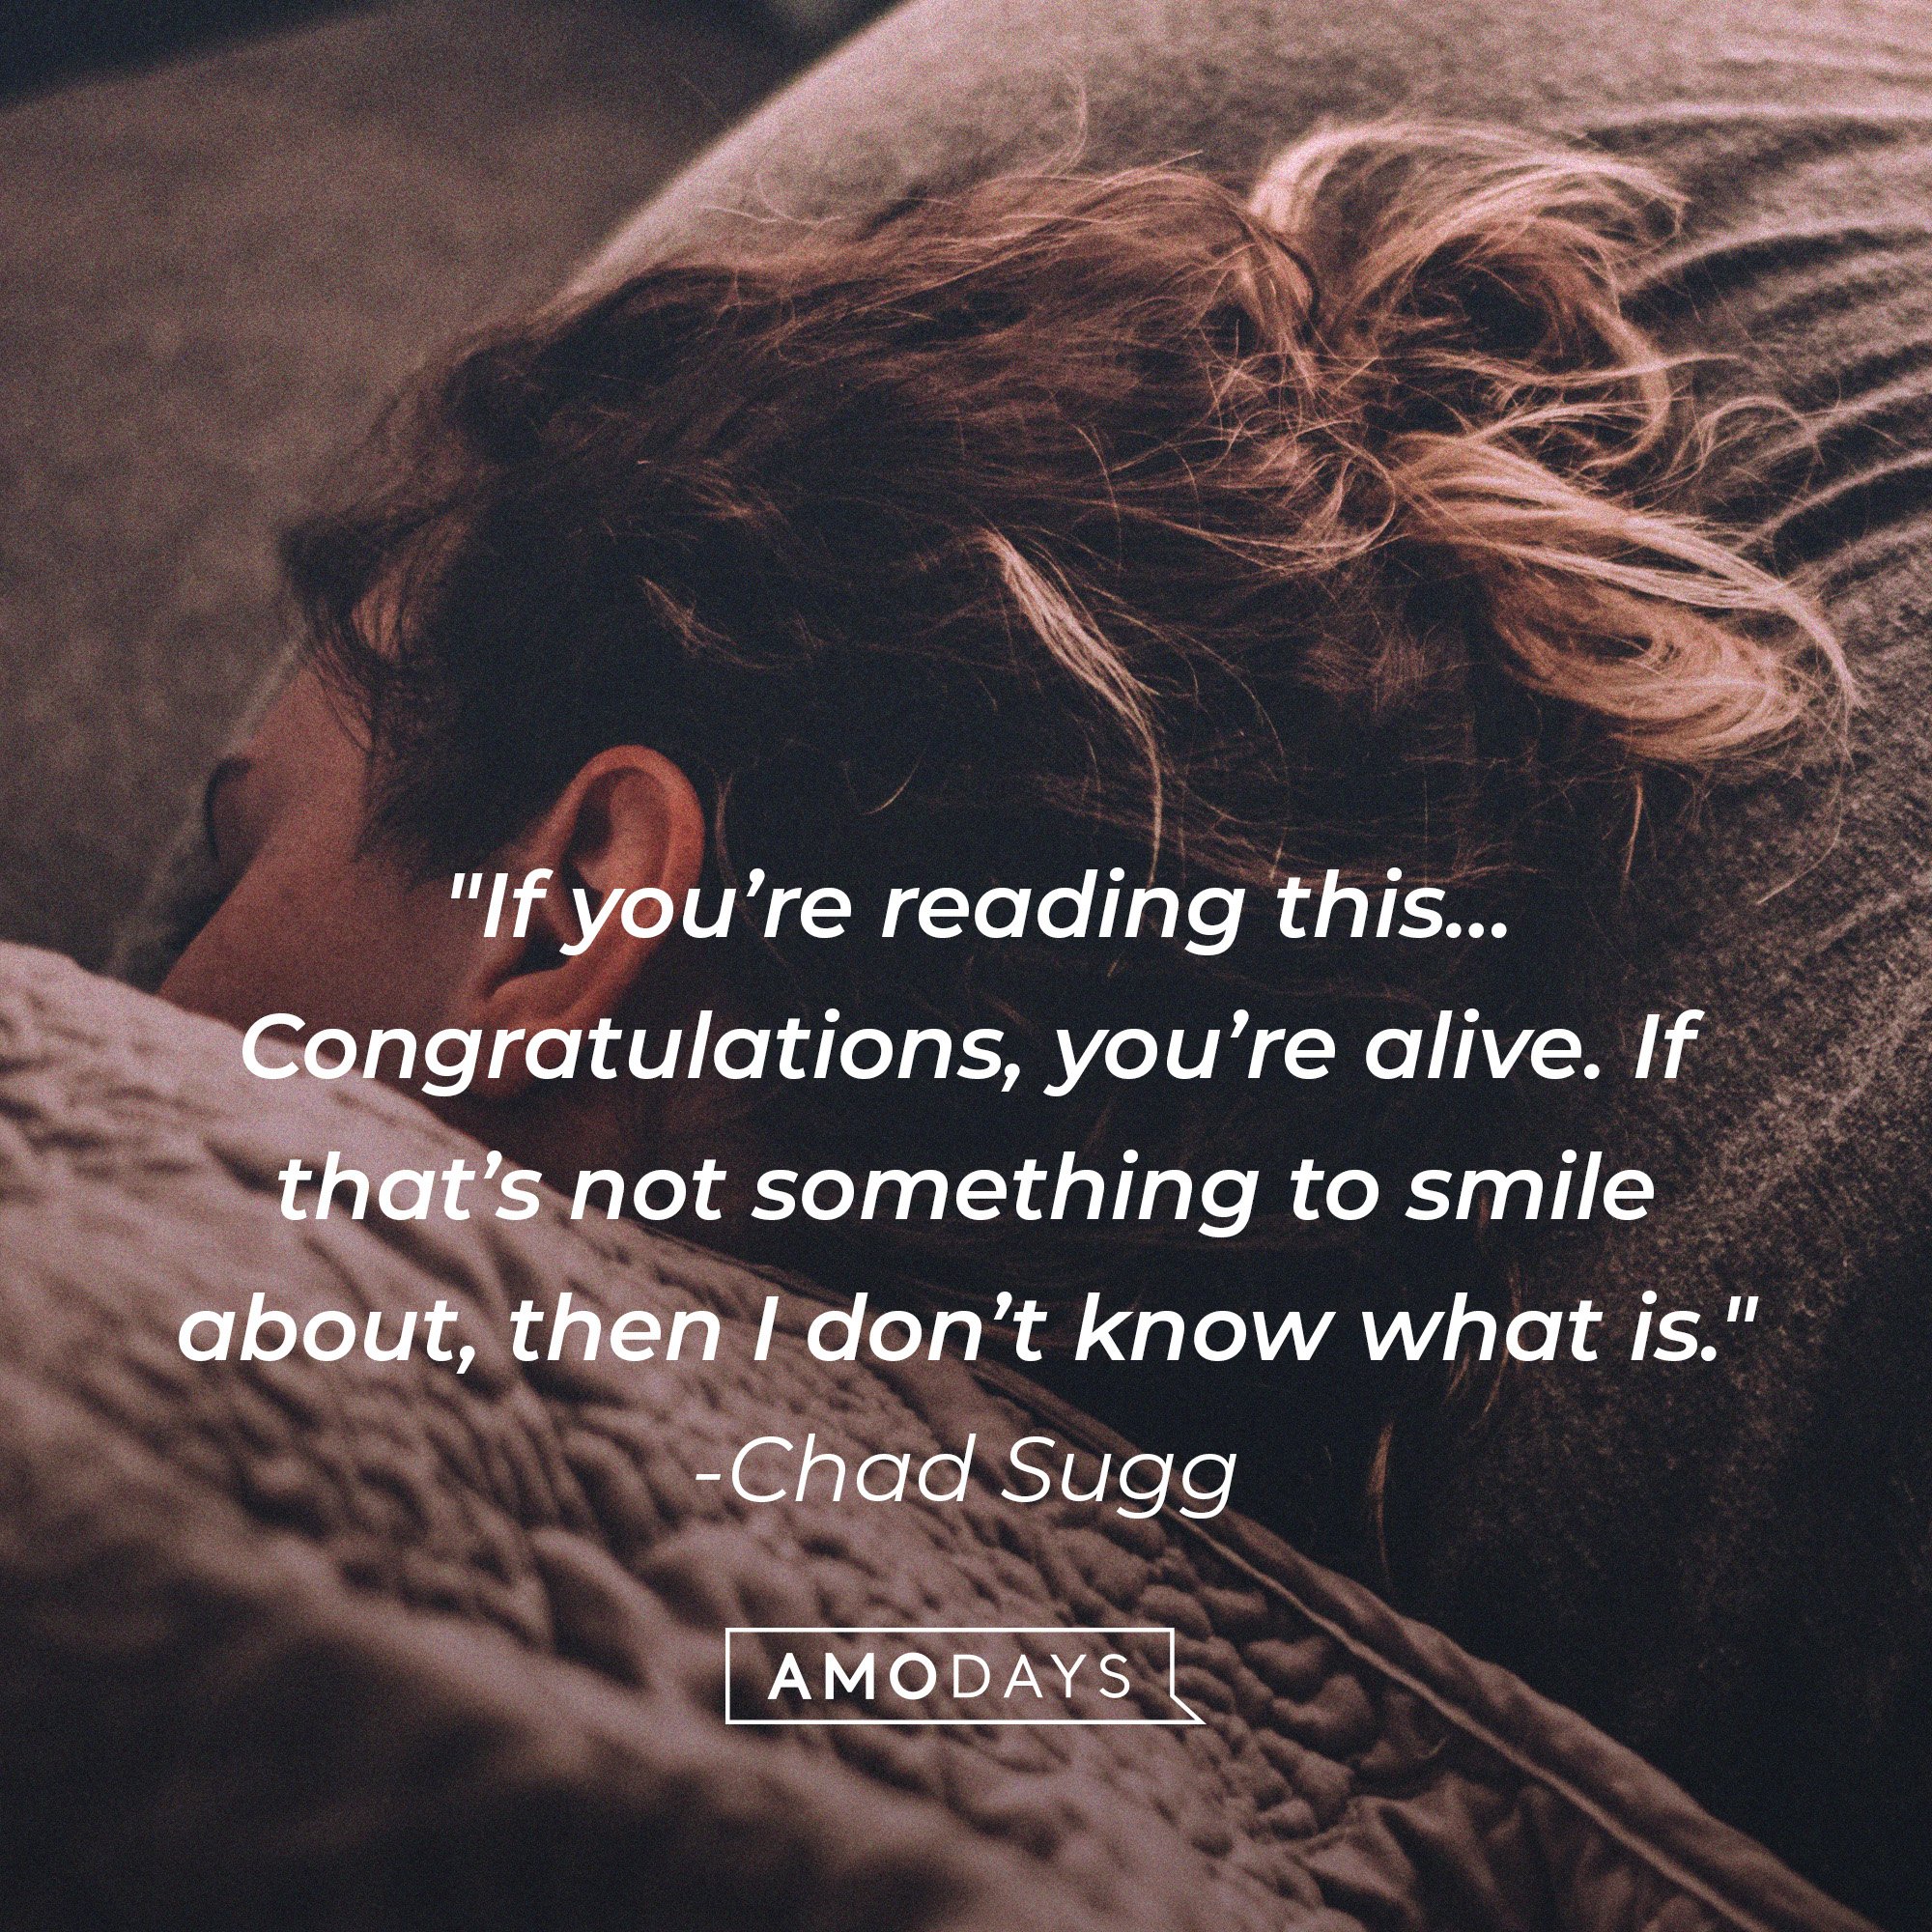 Chad Sugg's quote: "If you’re reading this… Congratulations, you’re alive. If that’s not something to smile about, then I don’t know what is." | Image: AmoDays 